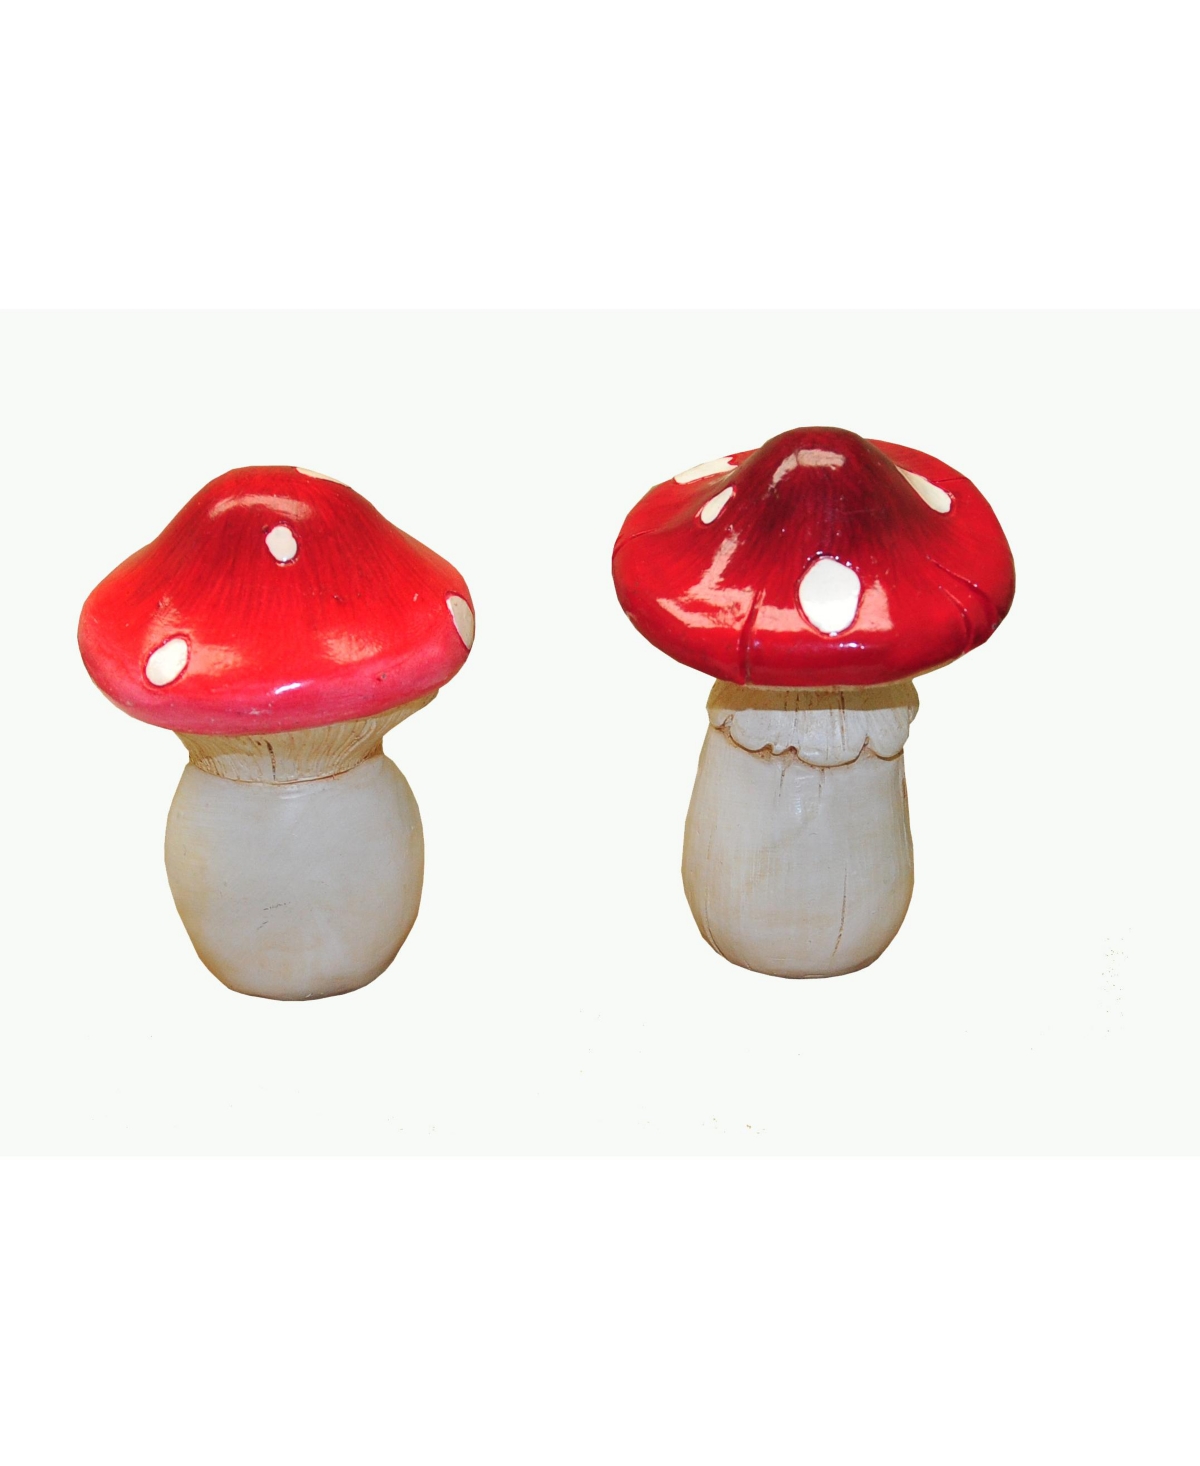 Garden Life Size Mushroom Statue, 2 pieces, Red - Red